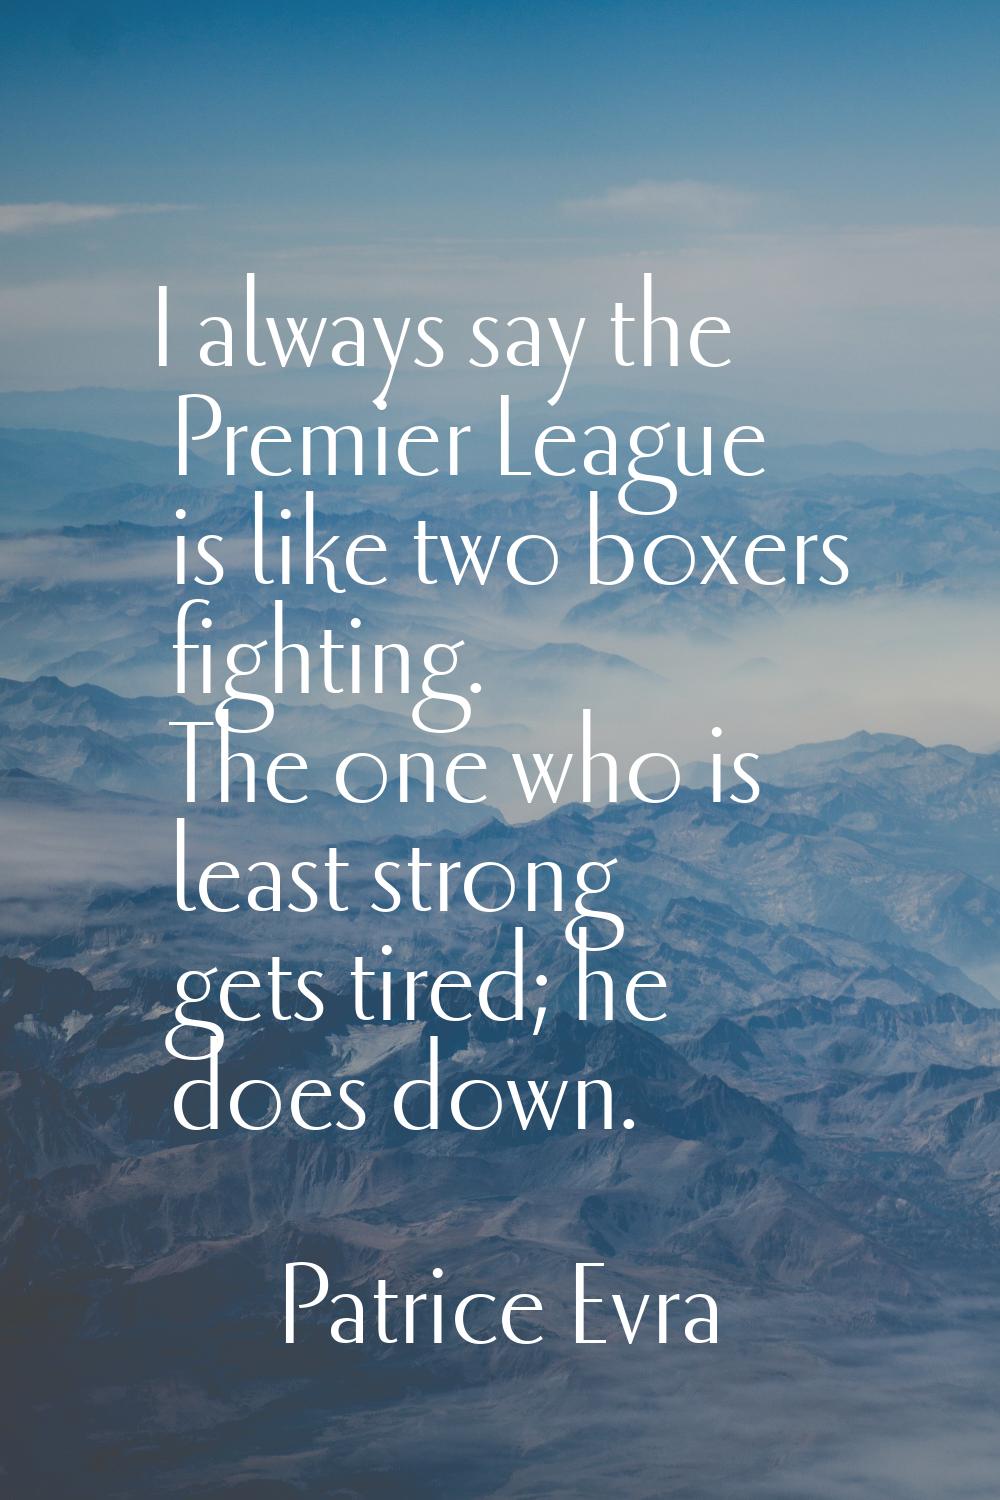 I always say the Premier League is like two boxers fighting. The one who is least strong gets tired